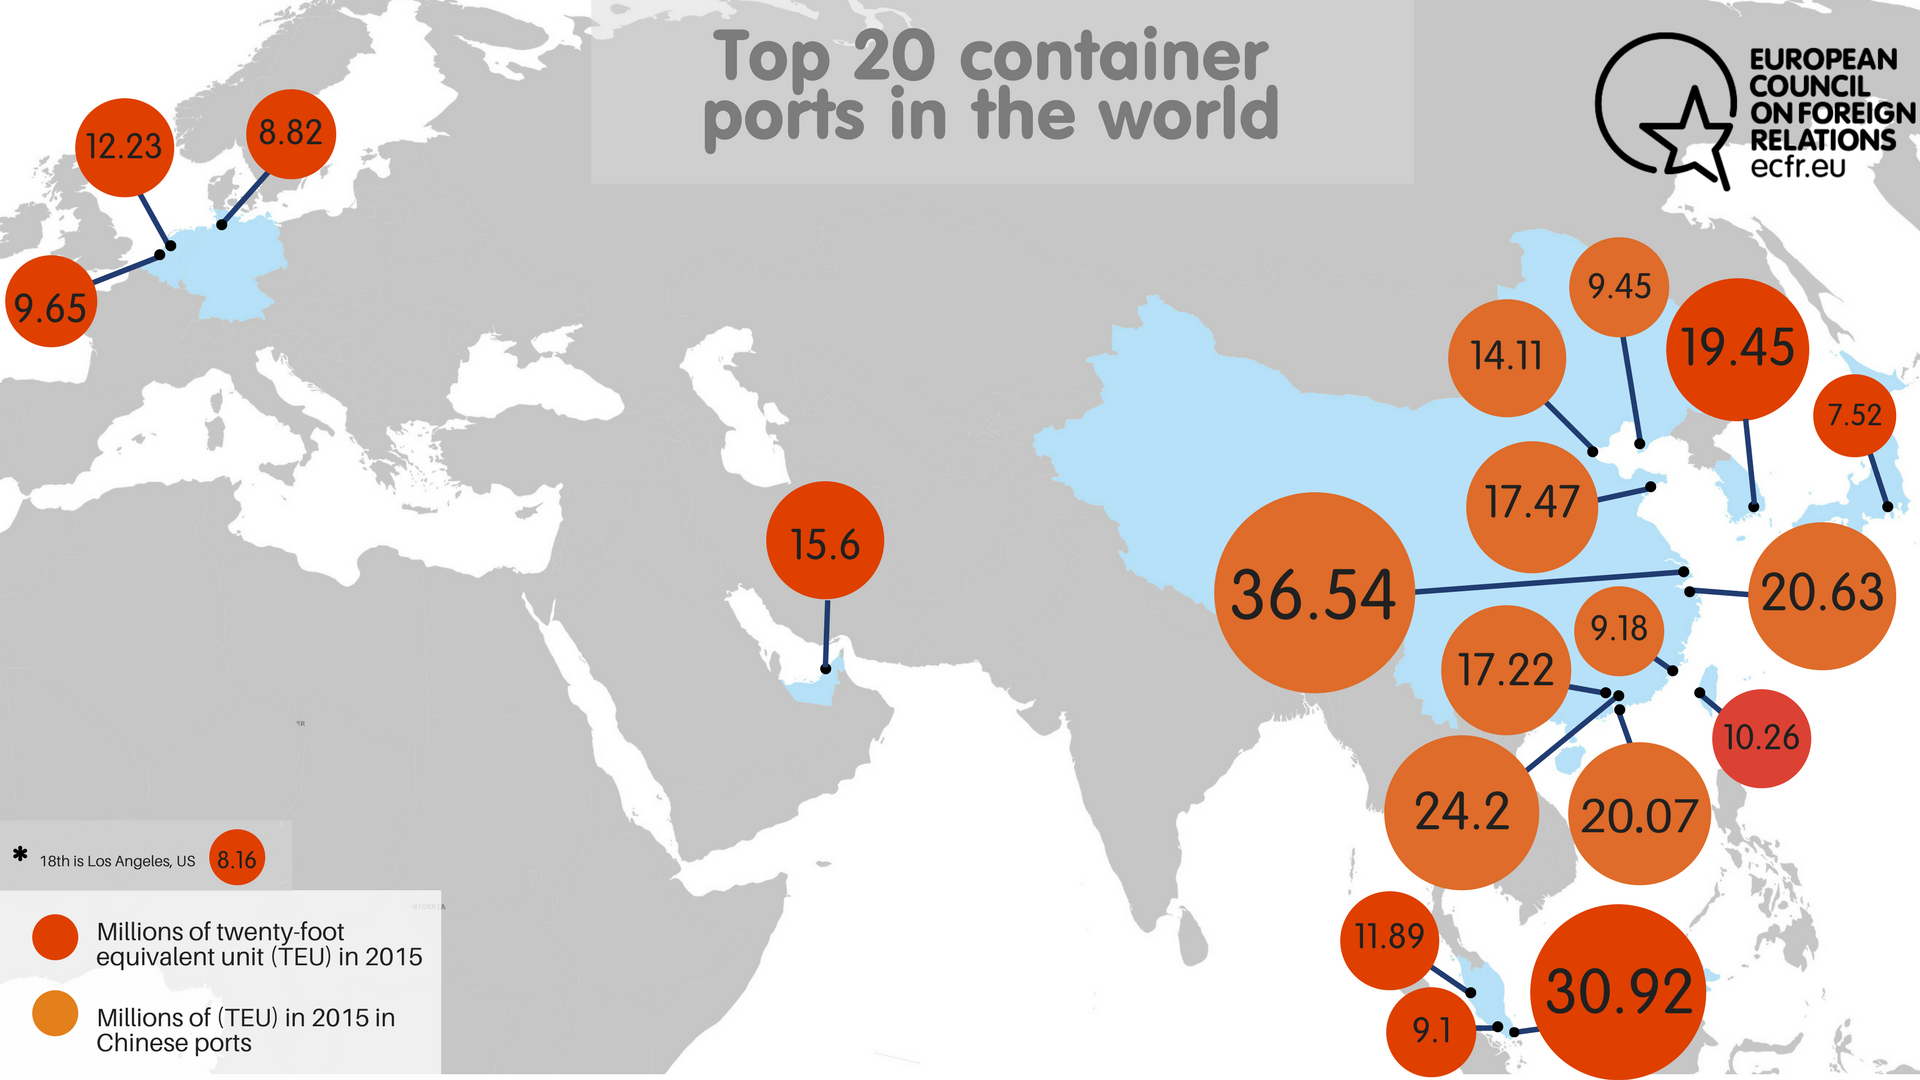 Top 20 container ports in the world